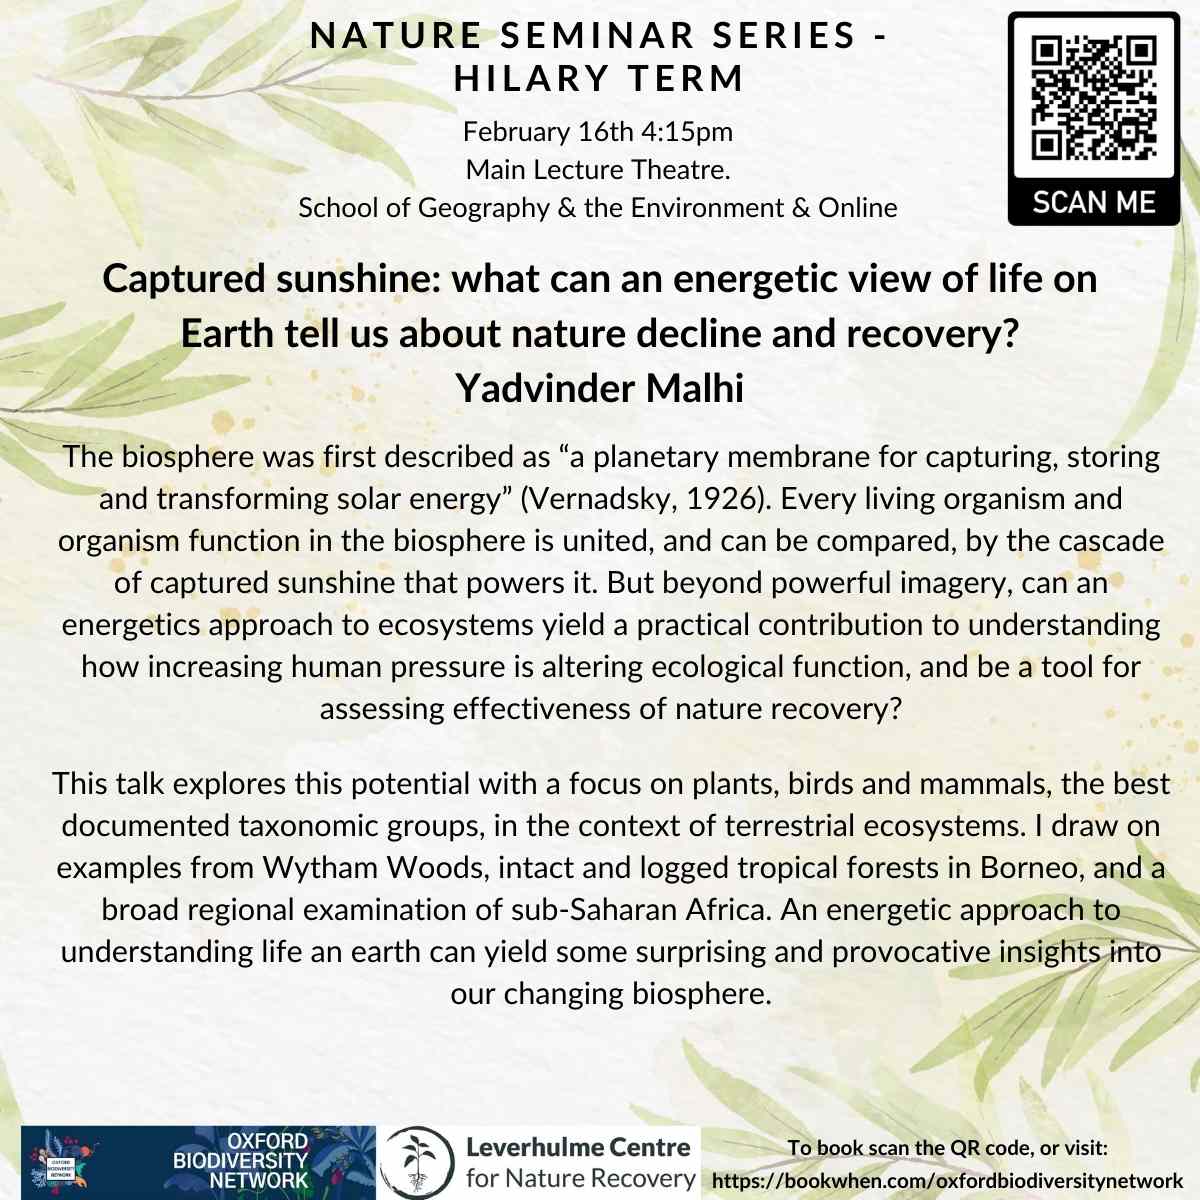 Join us on Feb 16th when @ymalhi will discuss if an energetics approach to ecosystems can yield a practical contribution to understanding how increasing human pressure is altering ecological function, & be a tool for assessing nature recovery. Register: tinyurl.com/42epj3dv